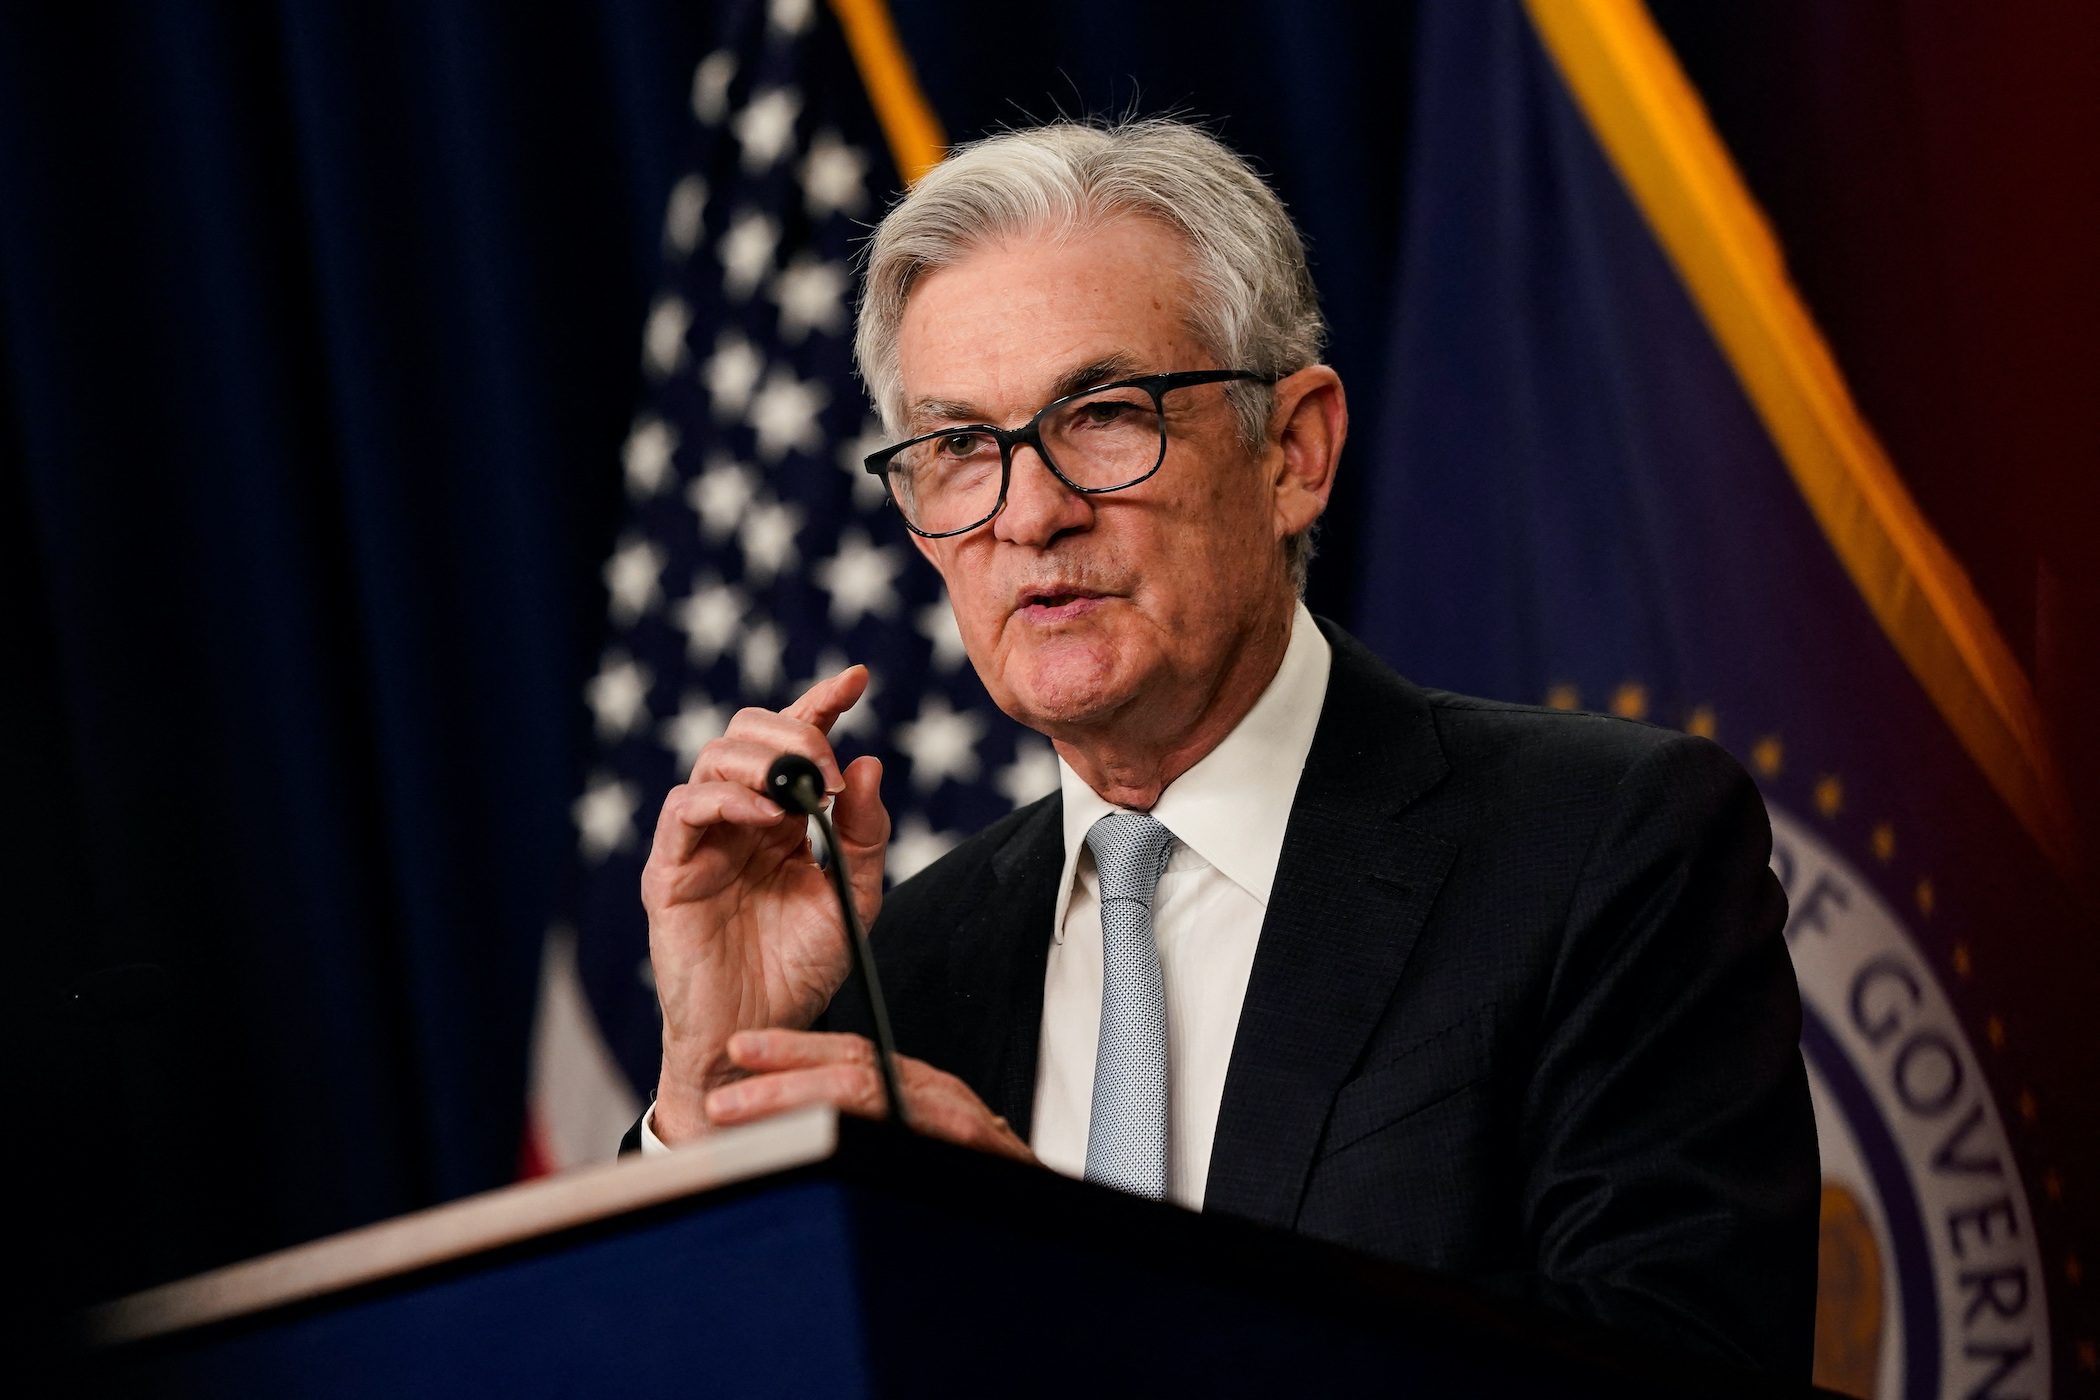 Fed jacks up interest rates again, hints at smaller increases ahead